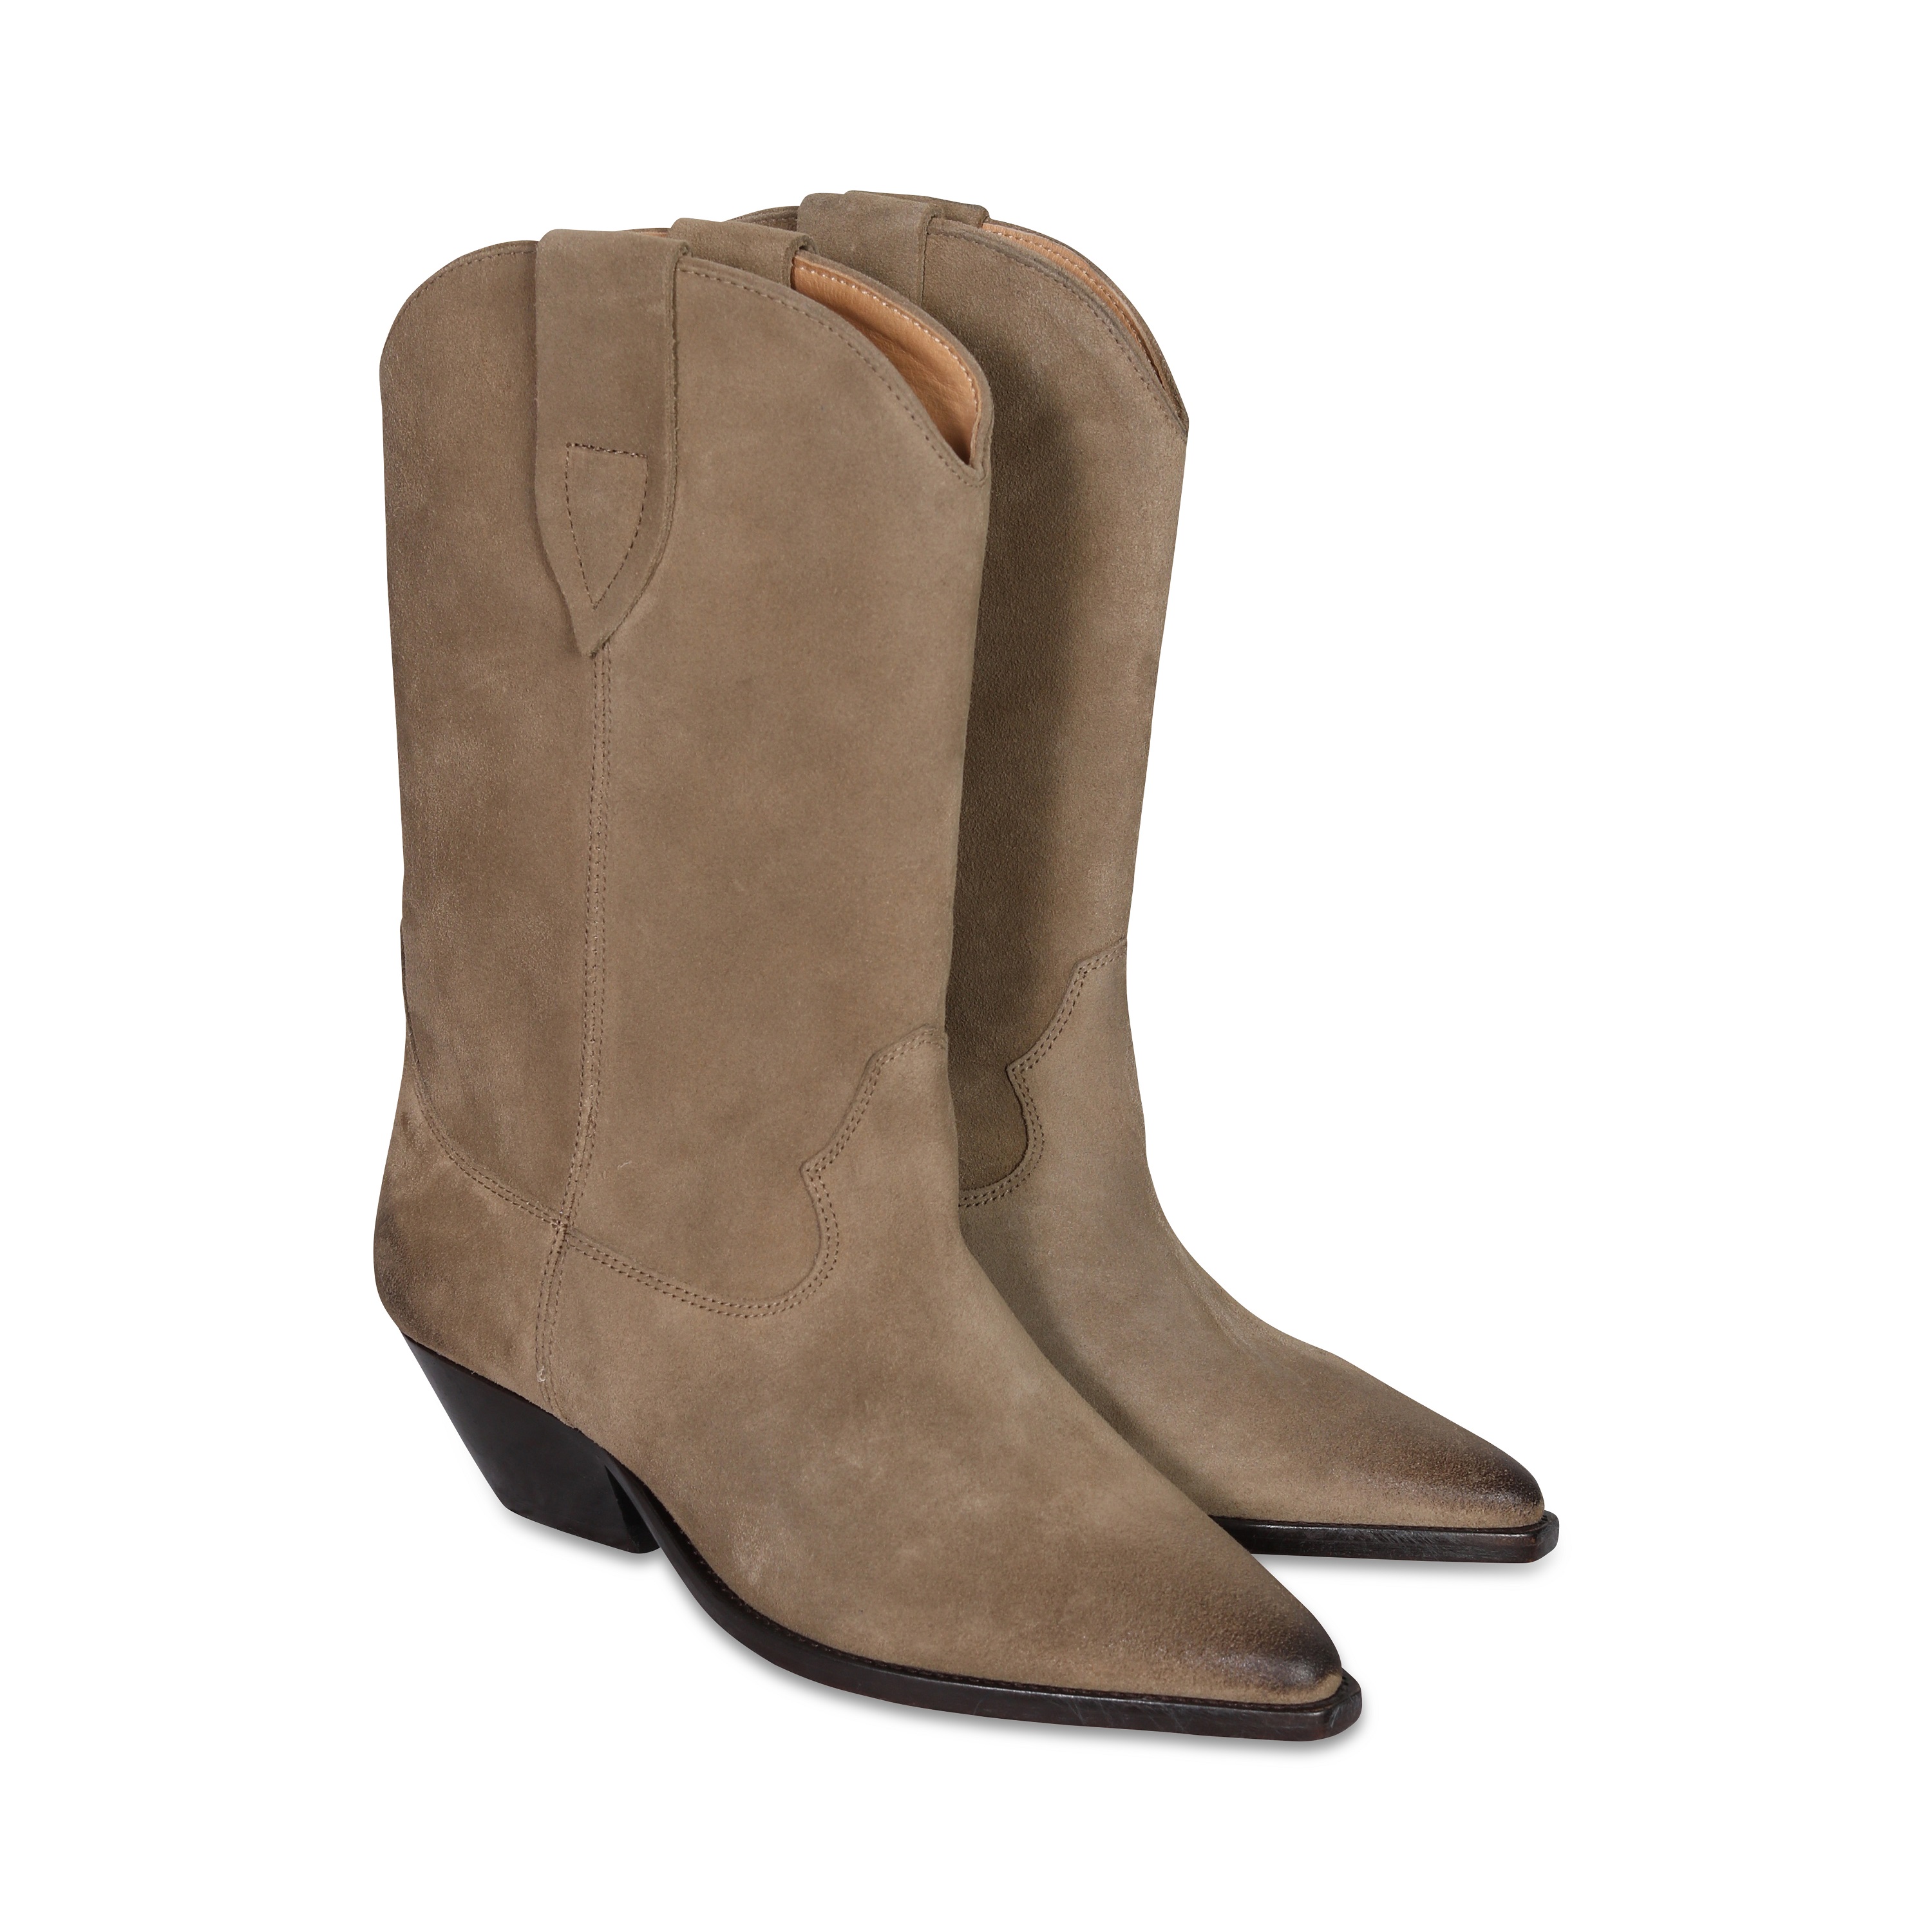 Isabel Marant Duerto Boots in Taupe 39